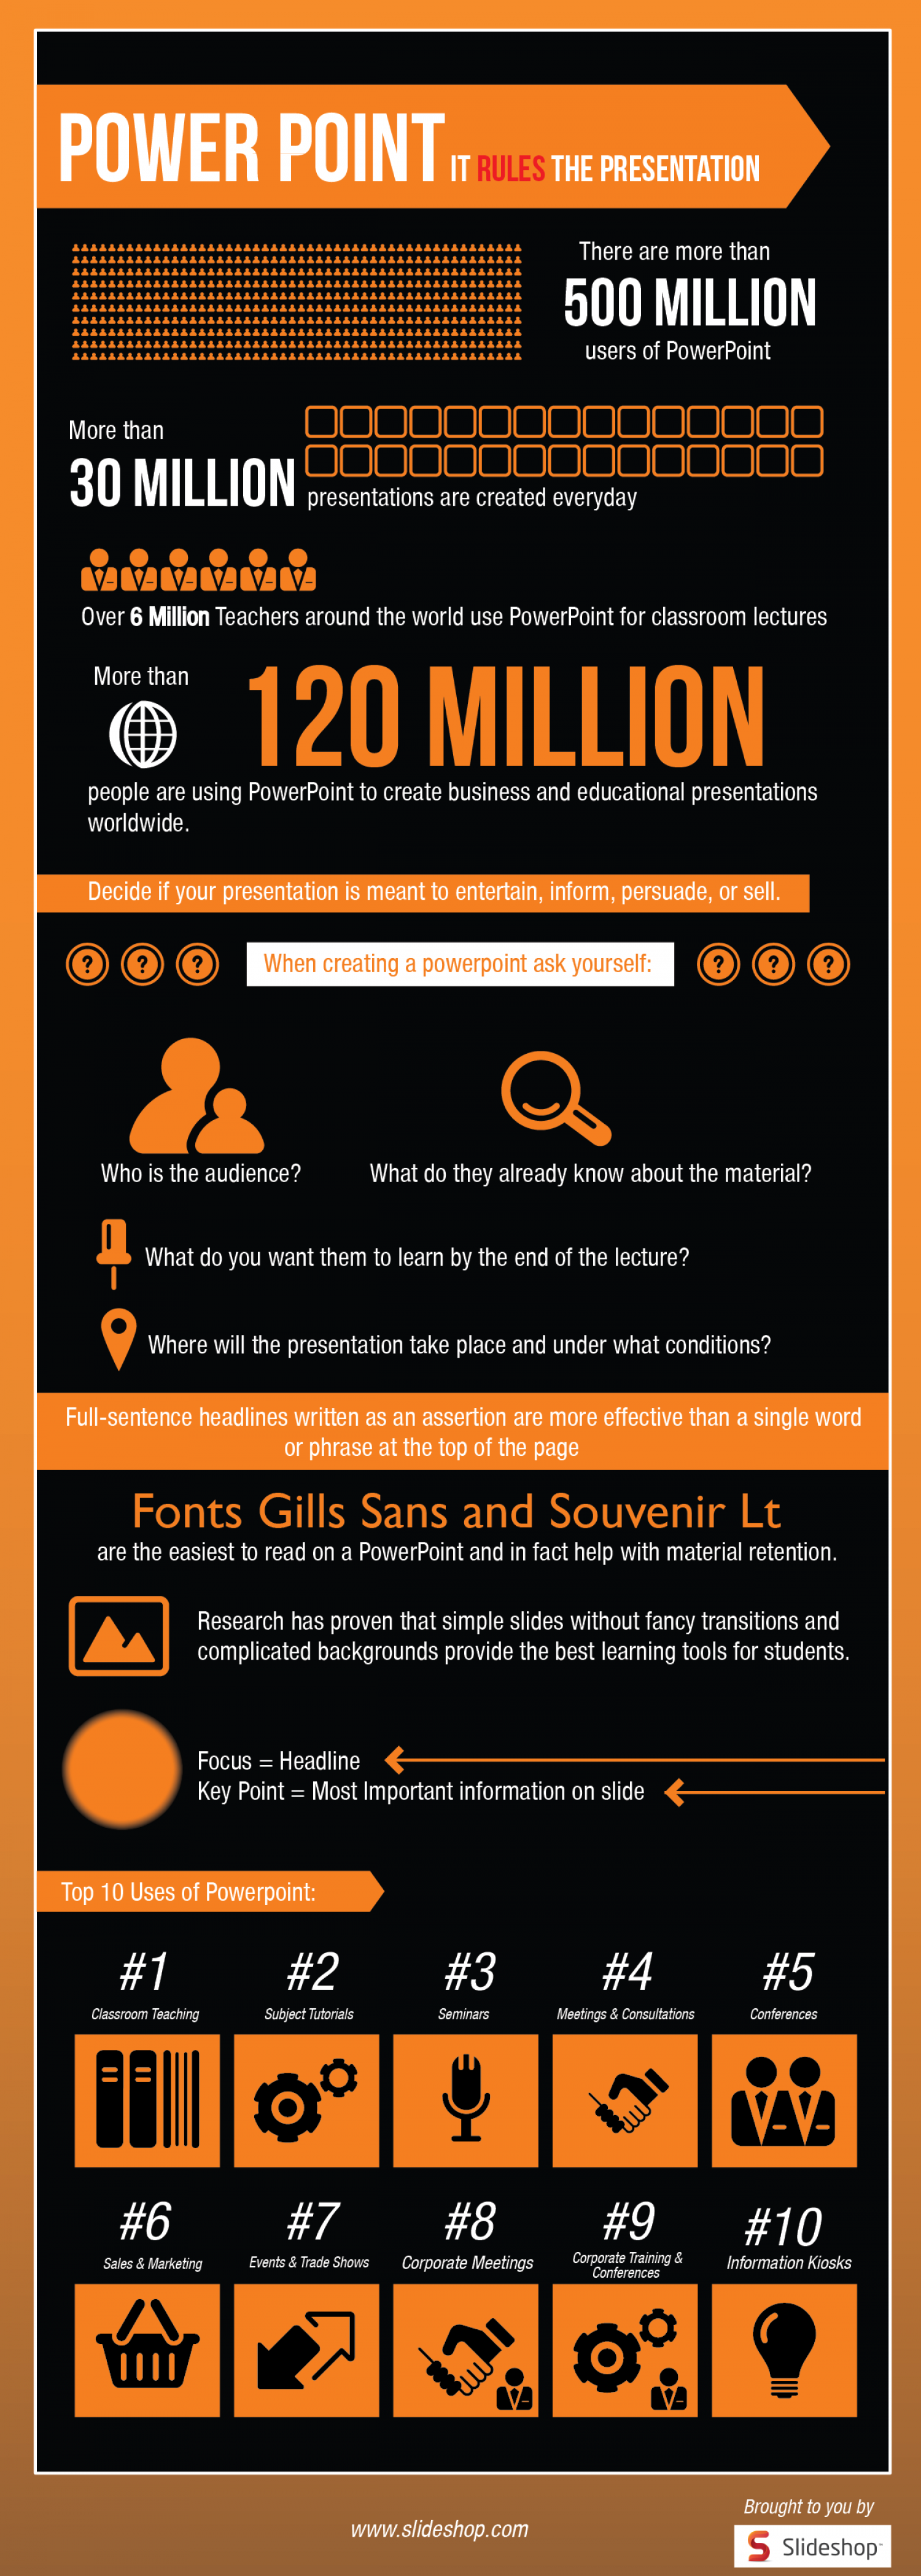 PowerPoint: It Rules the Presentation Infographic